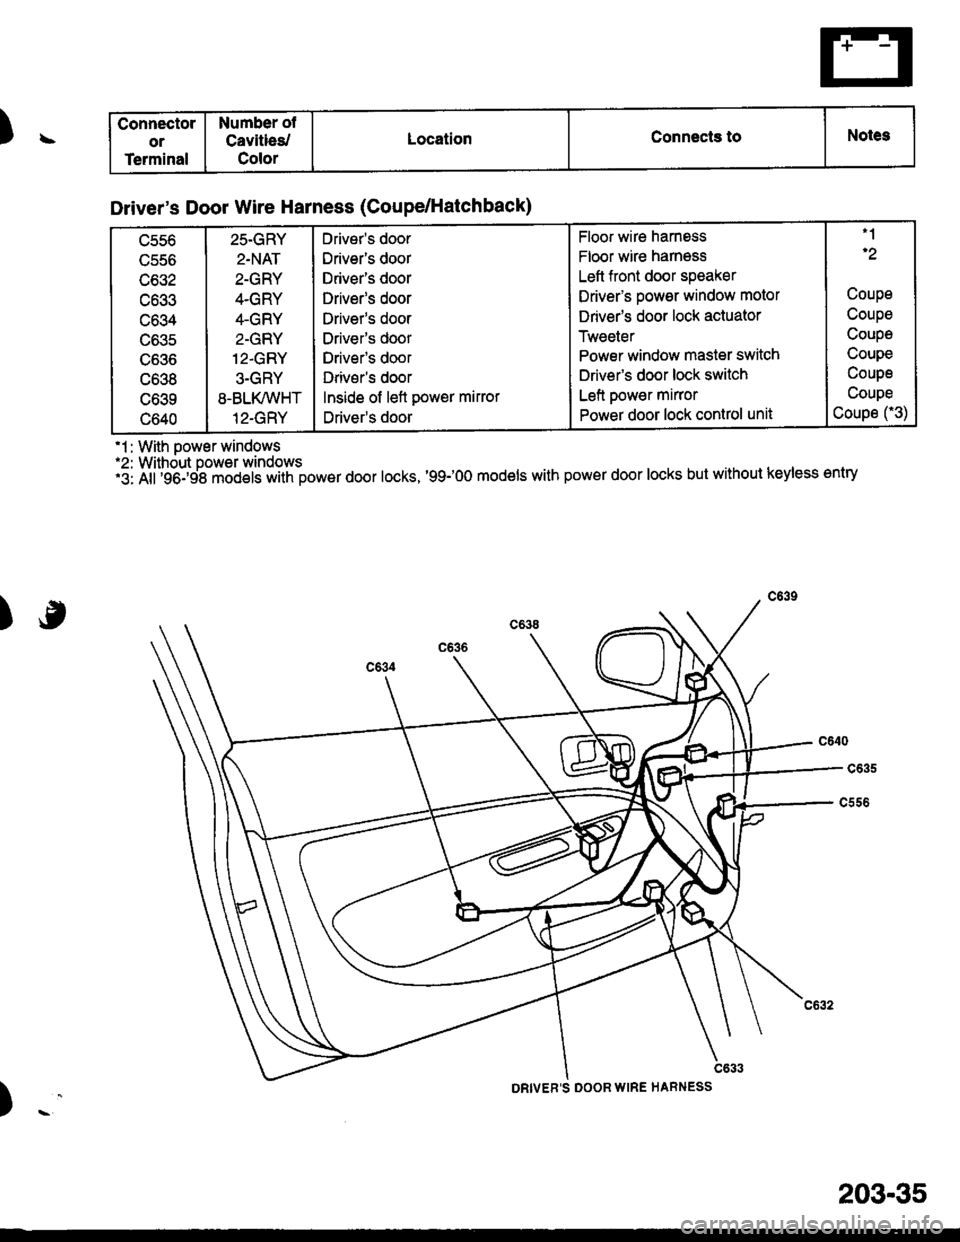 HONDA CIVIC 1999 6.G Owners Manual )\
.1 : With oower windows*2: Without power windows.5 nii;gO: Sle models with power door locks, 99-OO models with power door locks but without keyless entry
)
Connector
or
Terminal
Number ot
Cavit